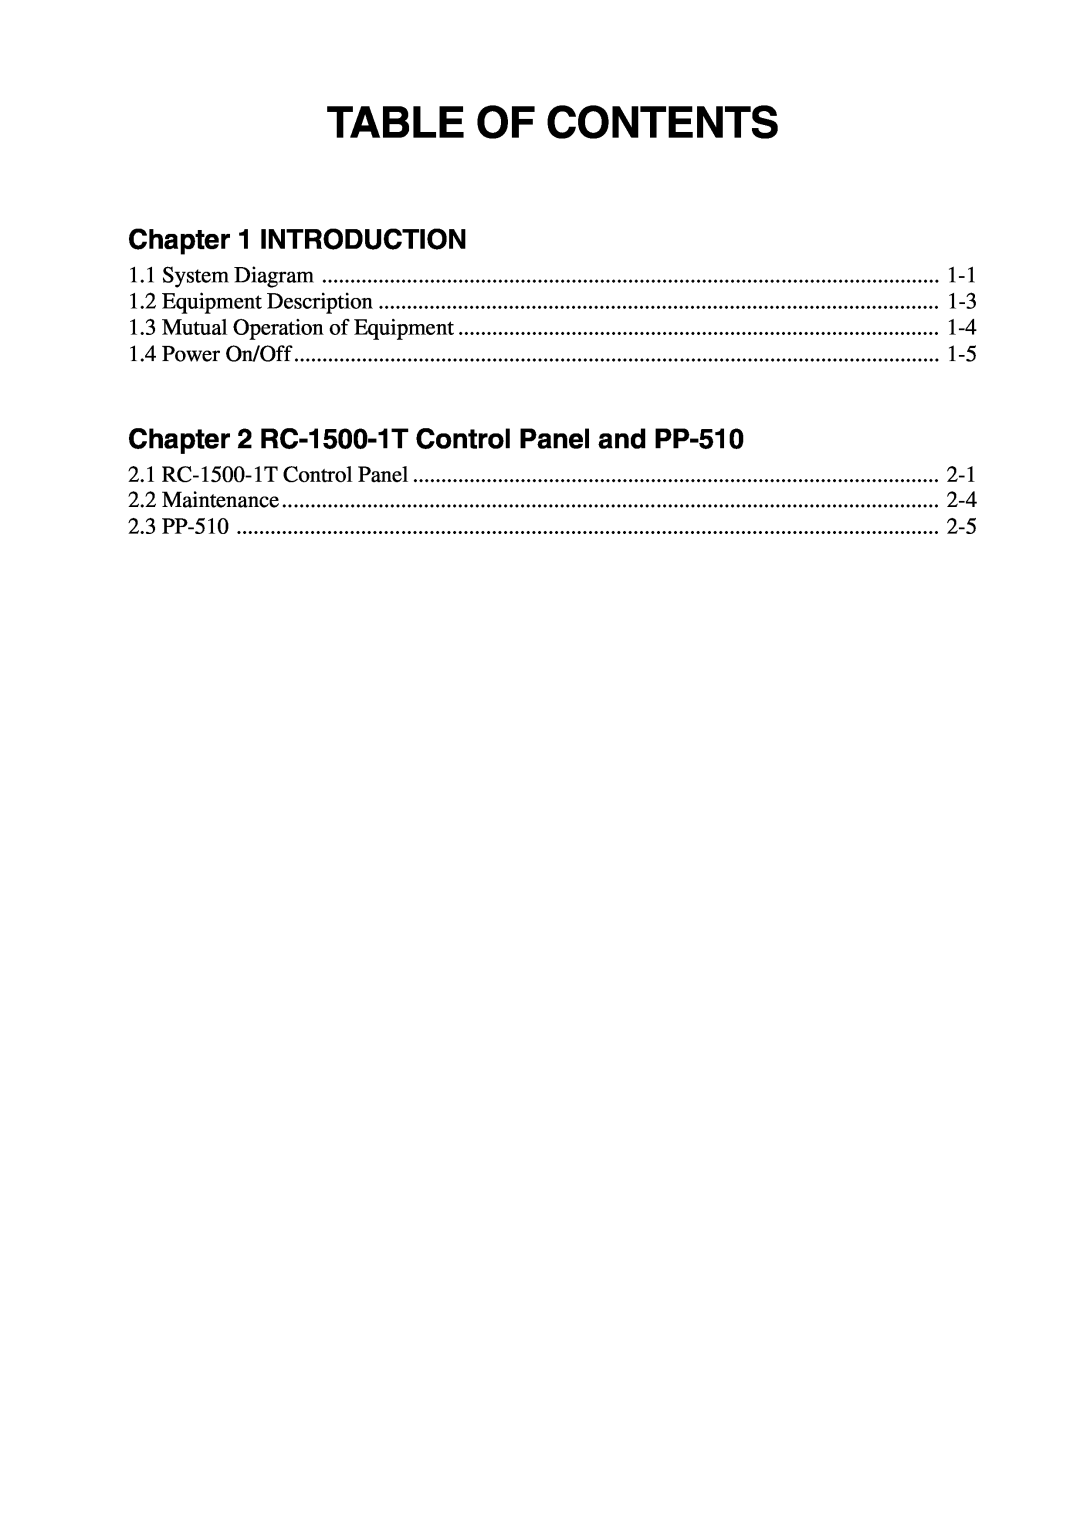 Furuno manual Introduction, RC-1500-1T Control Panel and PP-510, Table Of Contents 